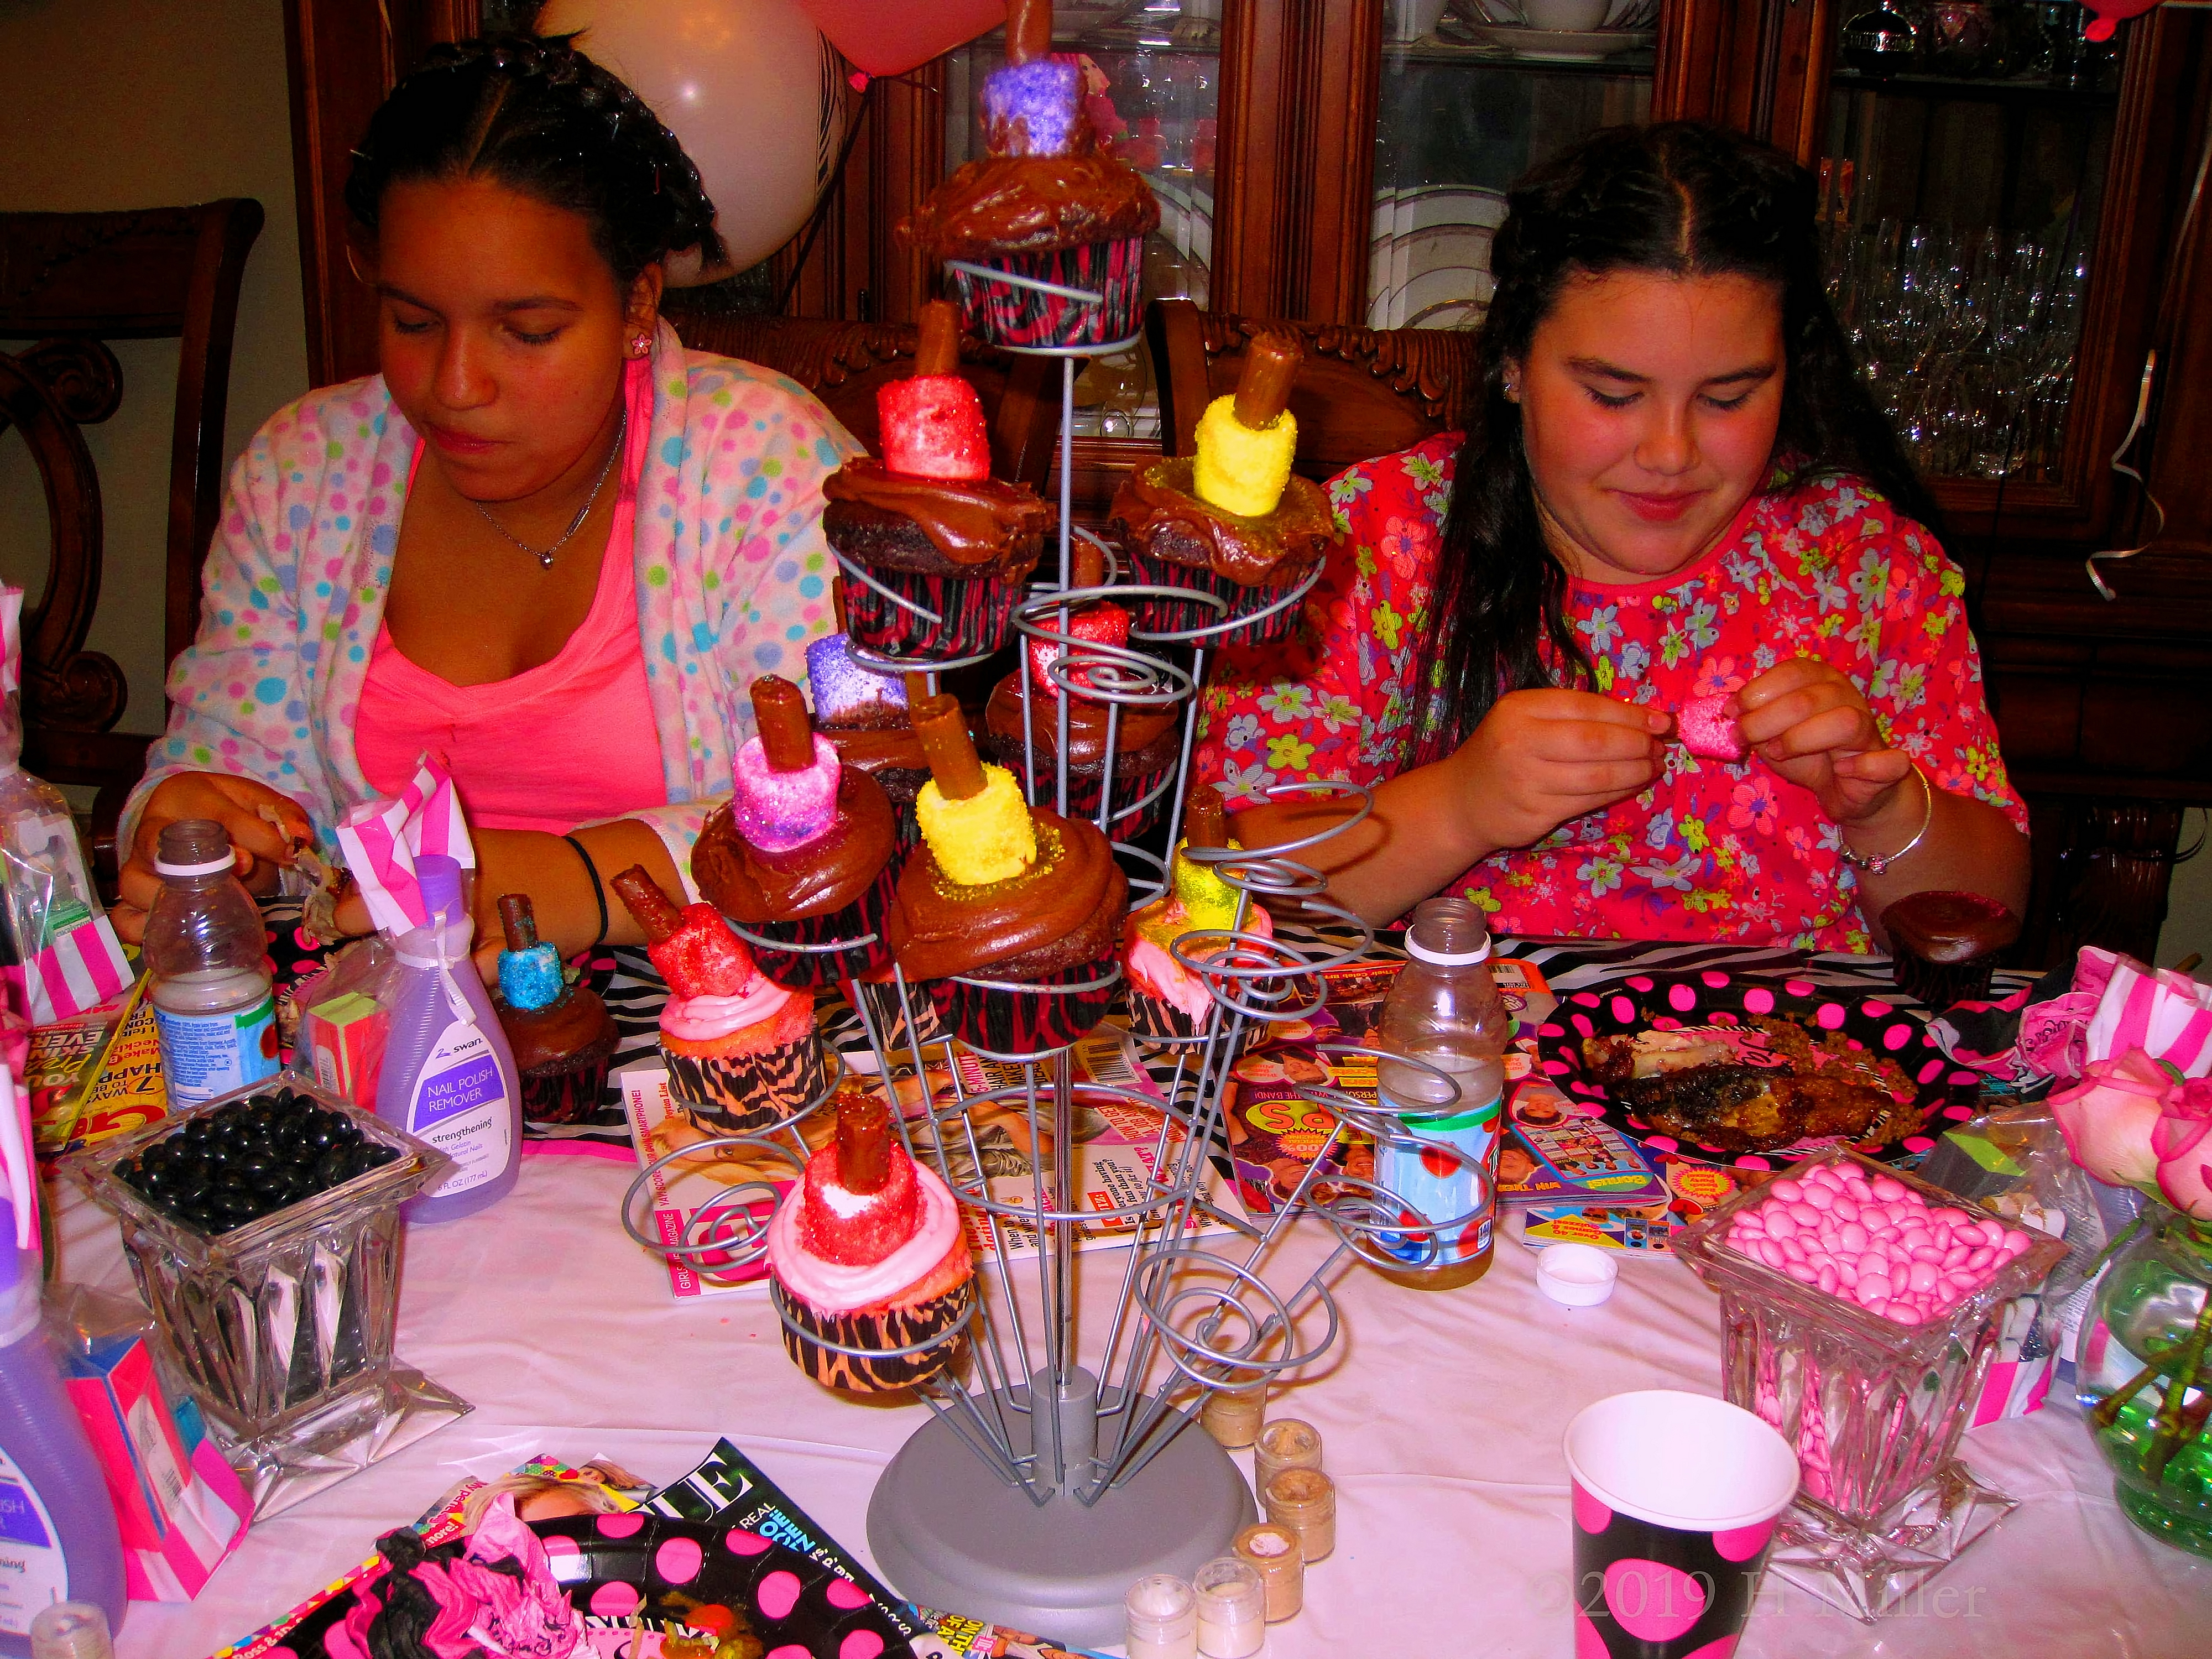 Kids Spa Party For Jillian In New Jersey In October 2014 Gallery 2 